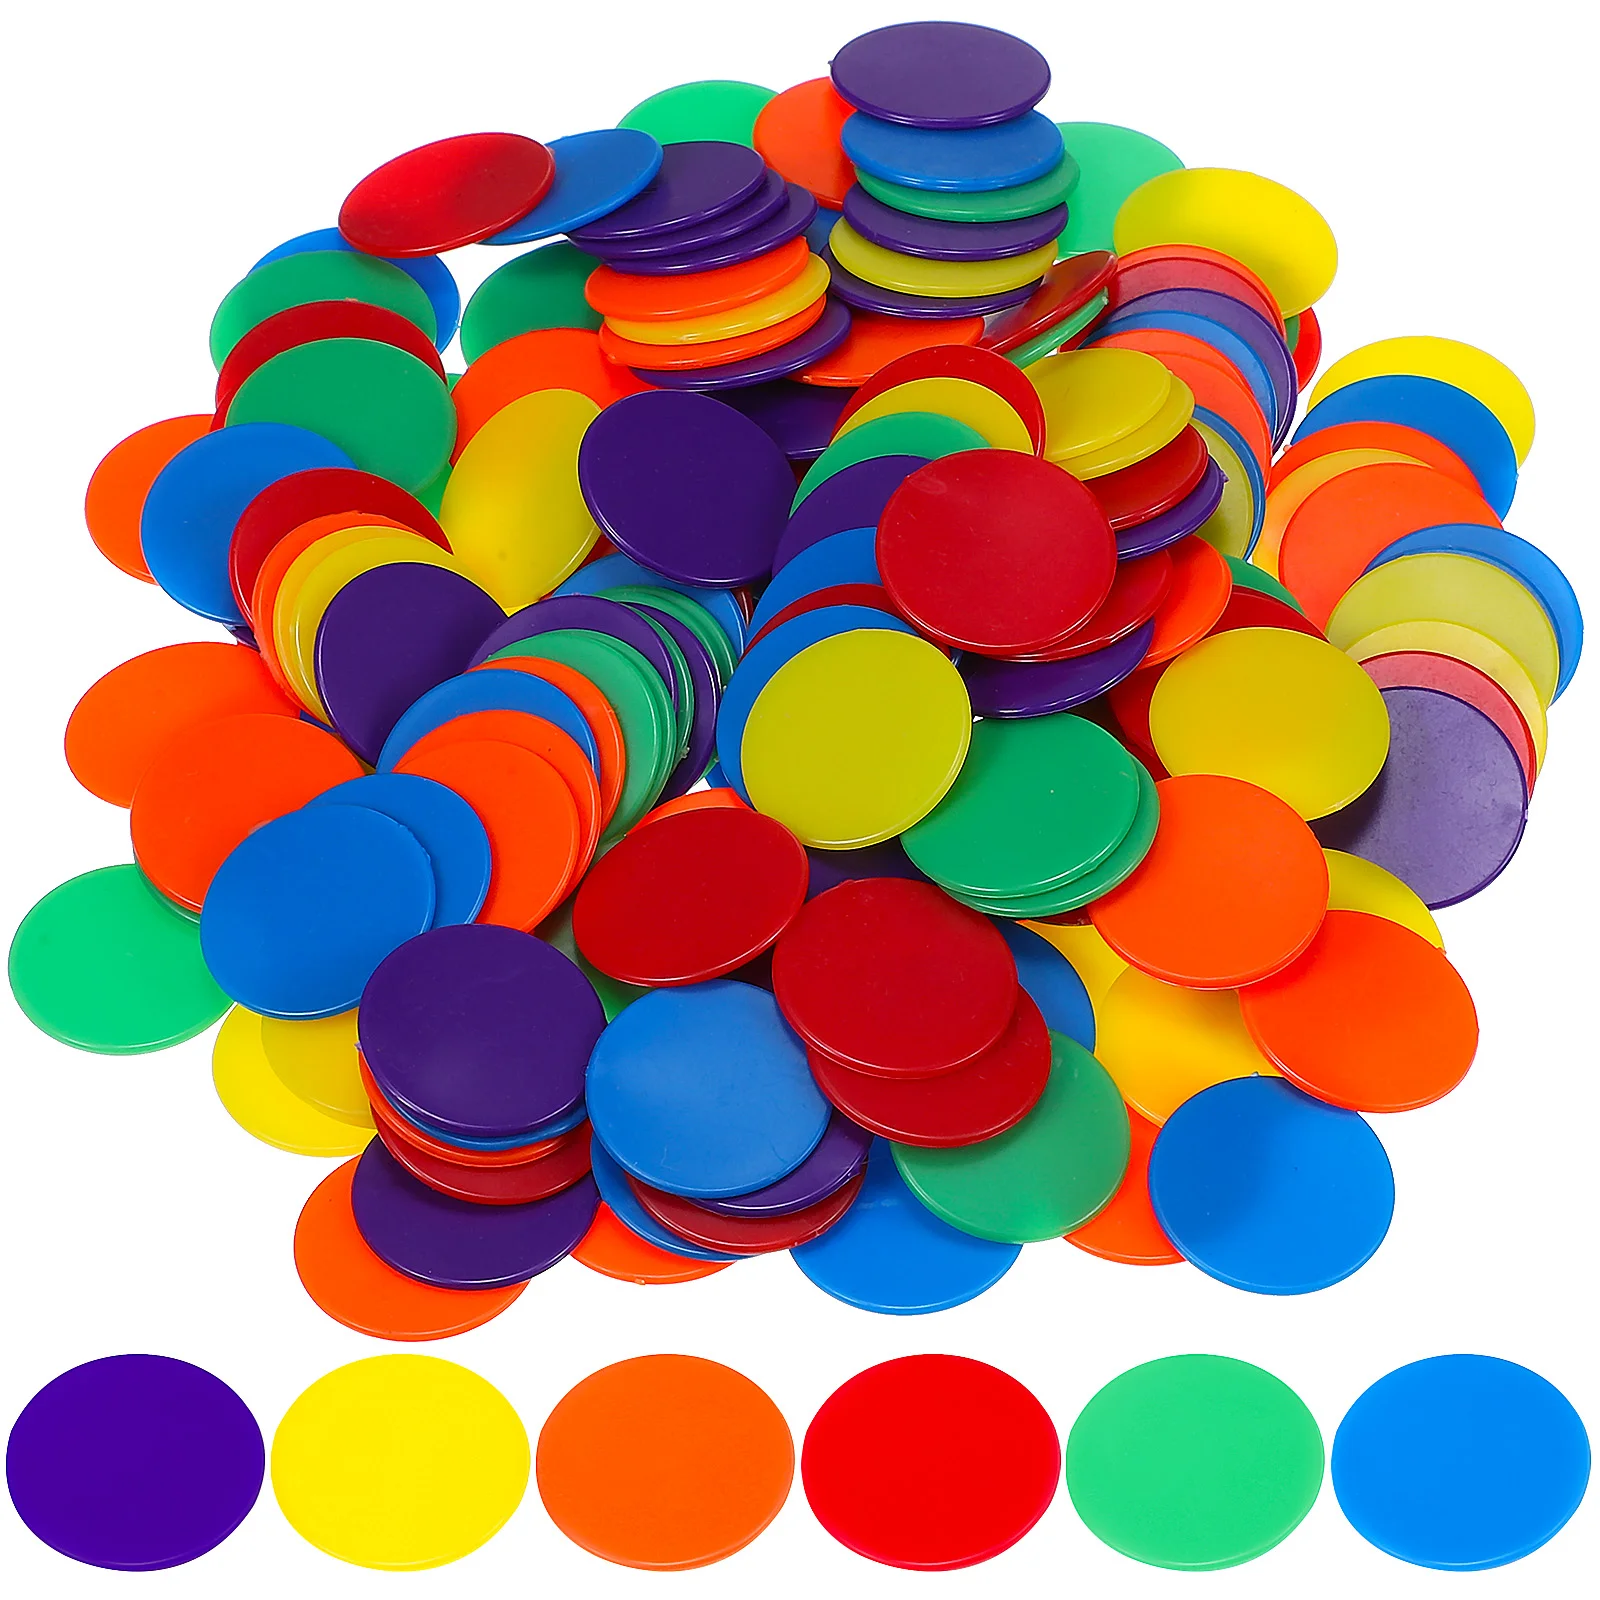 

180pcs Counting Chips Bingo Chips Poker Chips Poker Cards Game Chips Party Games Counting Discs Markers